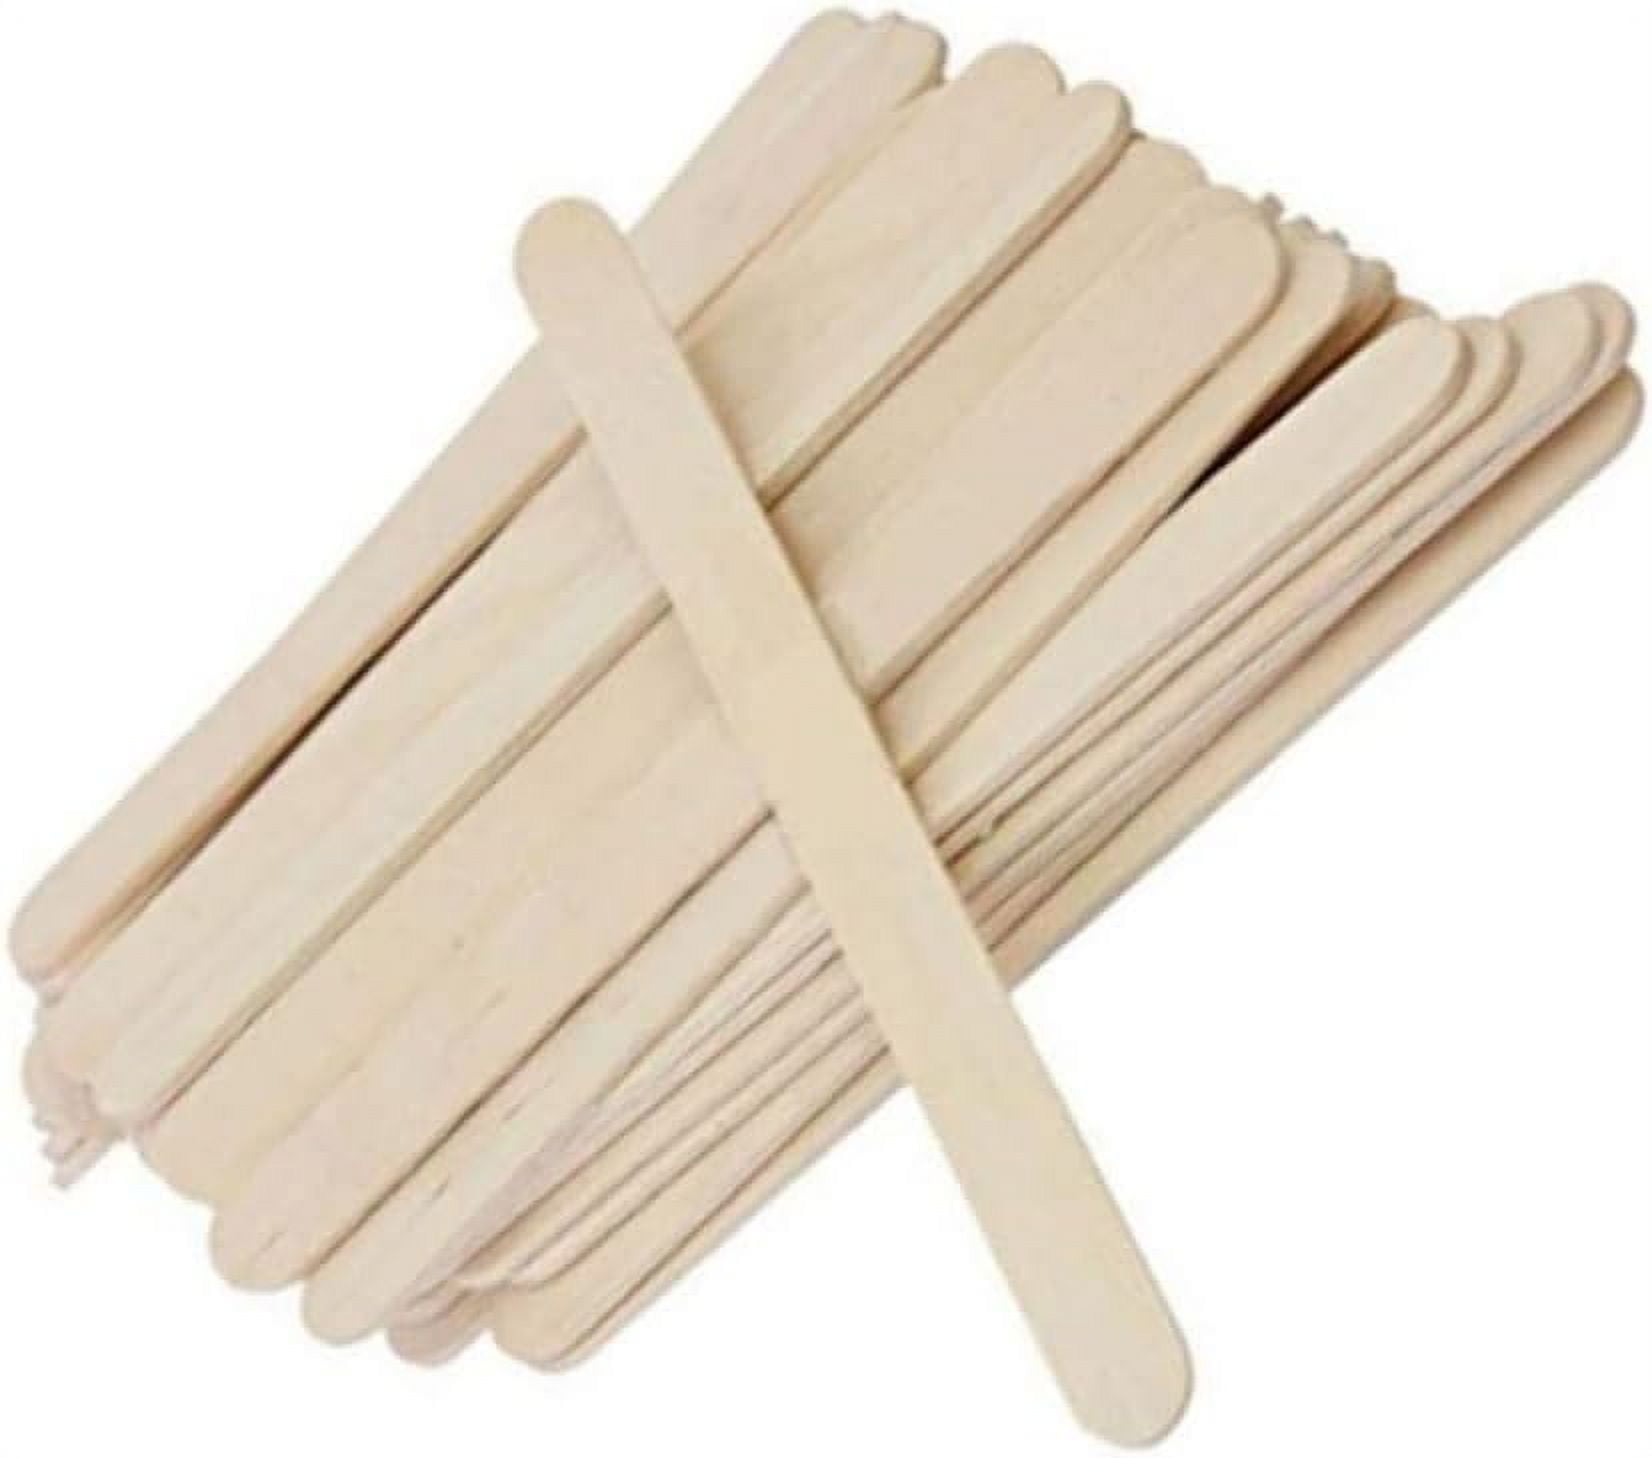 50-100pcs/Lot Wood Stick Natural Wooden Pop Popsicle Sticks Wood Craft Ice  Cream Sticks For Epoxy Resin Jewelry Making Tools